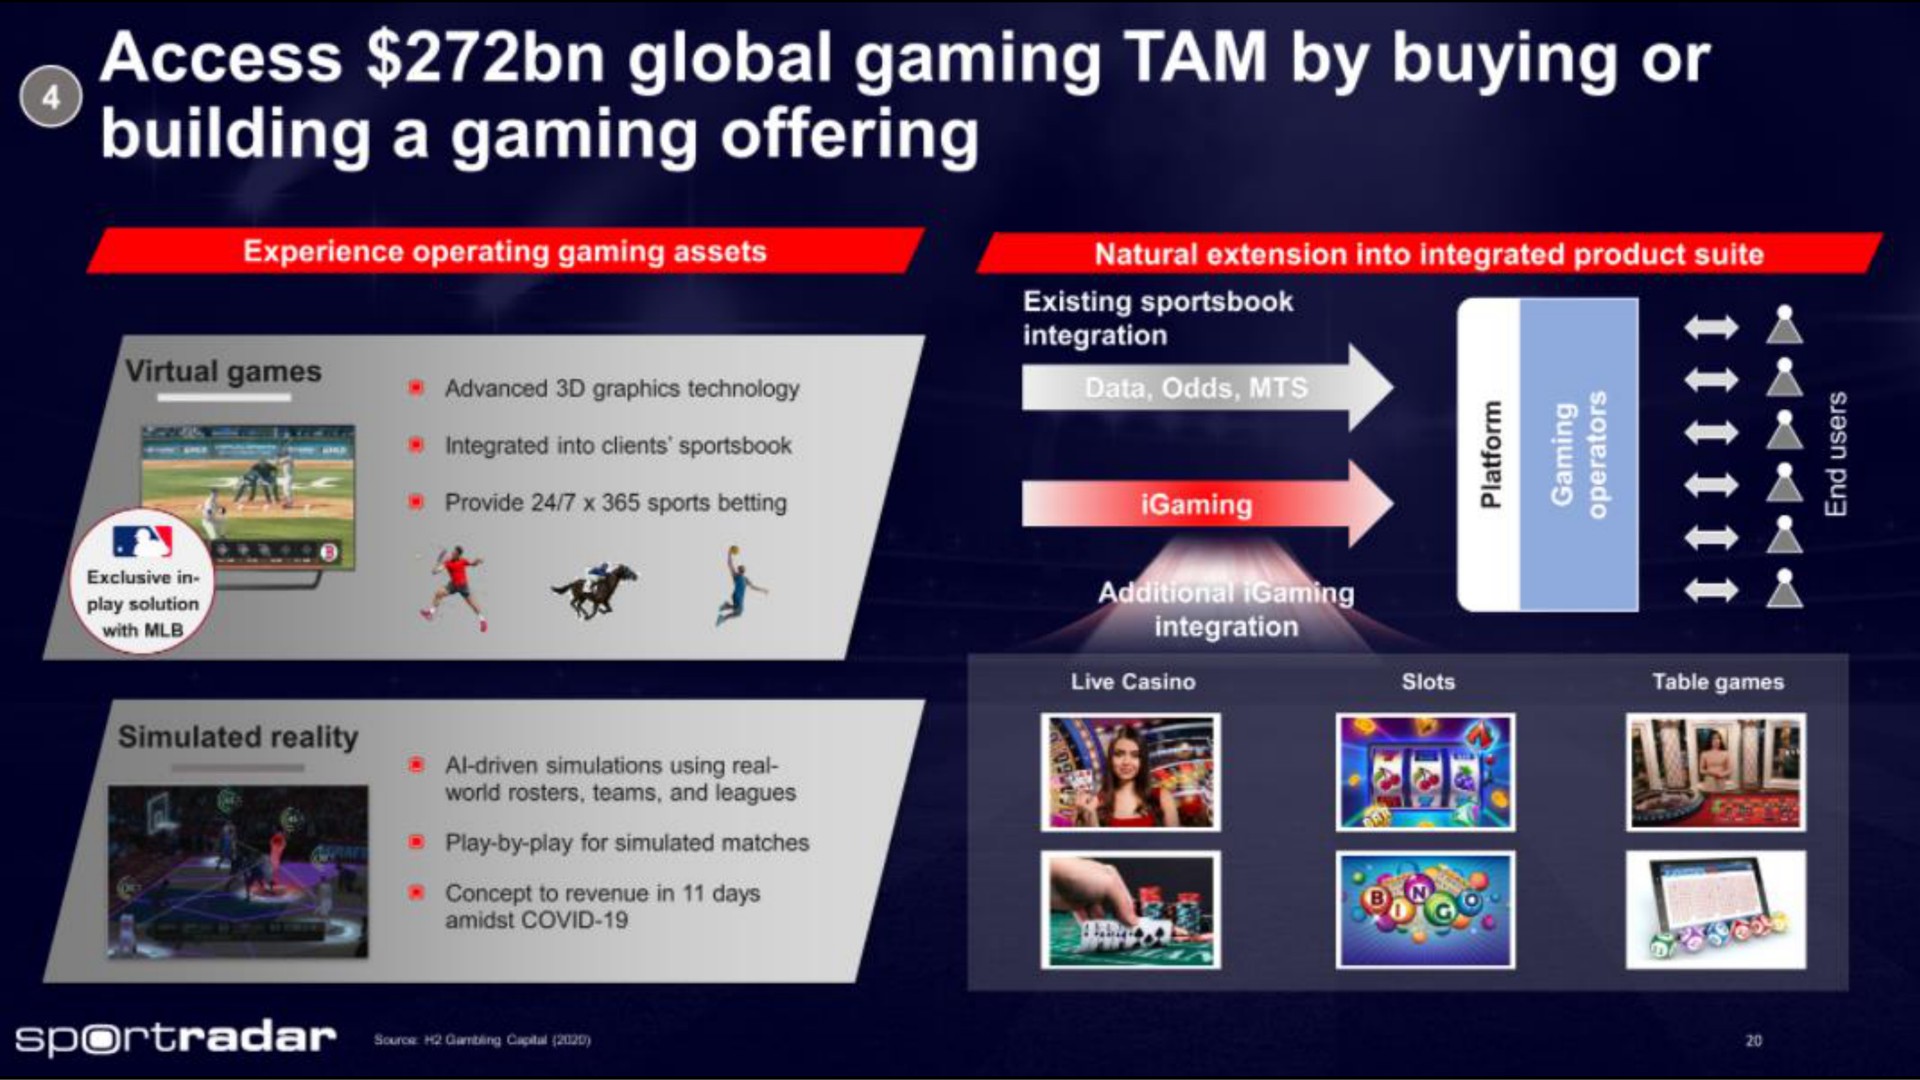 access global gaming tam by buying or building a gaming offering | Sportradar